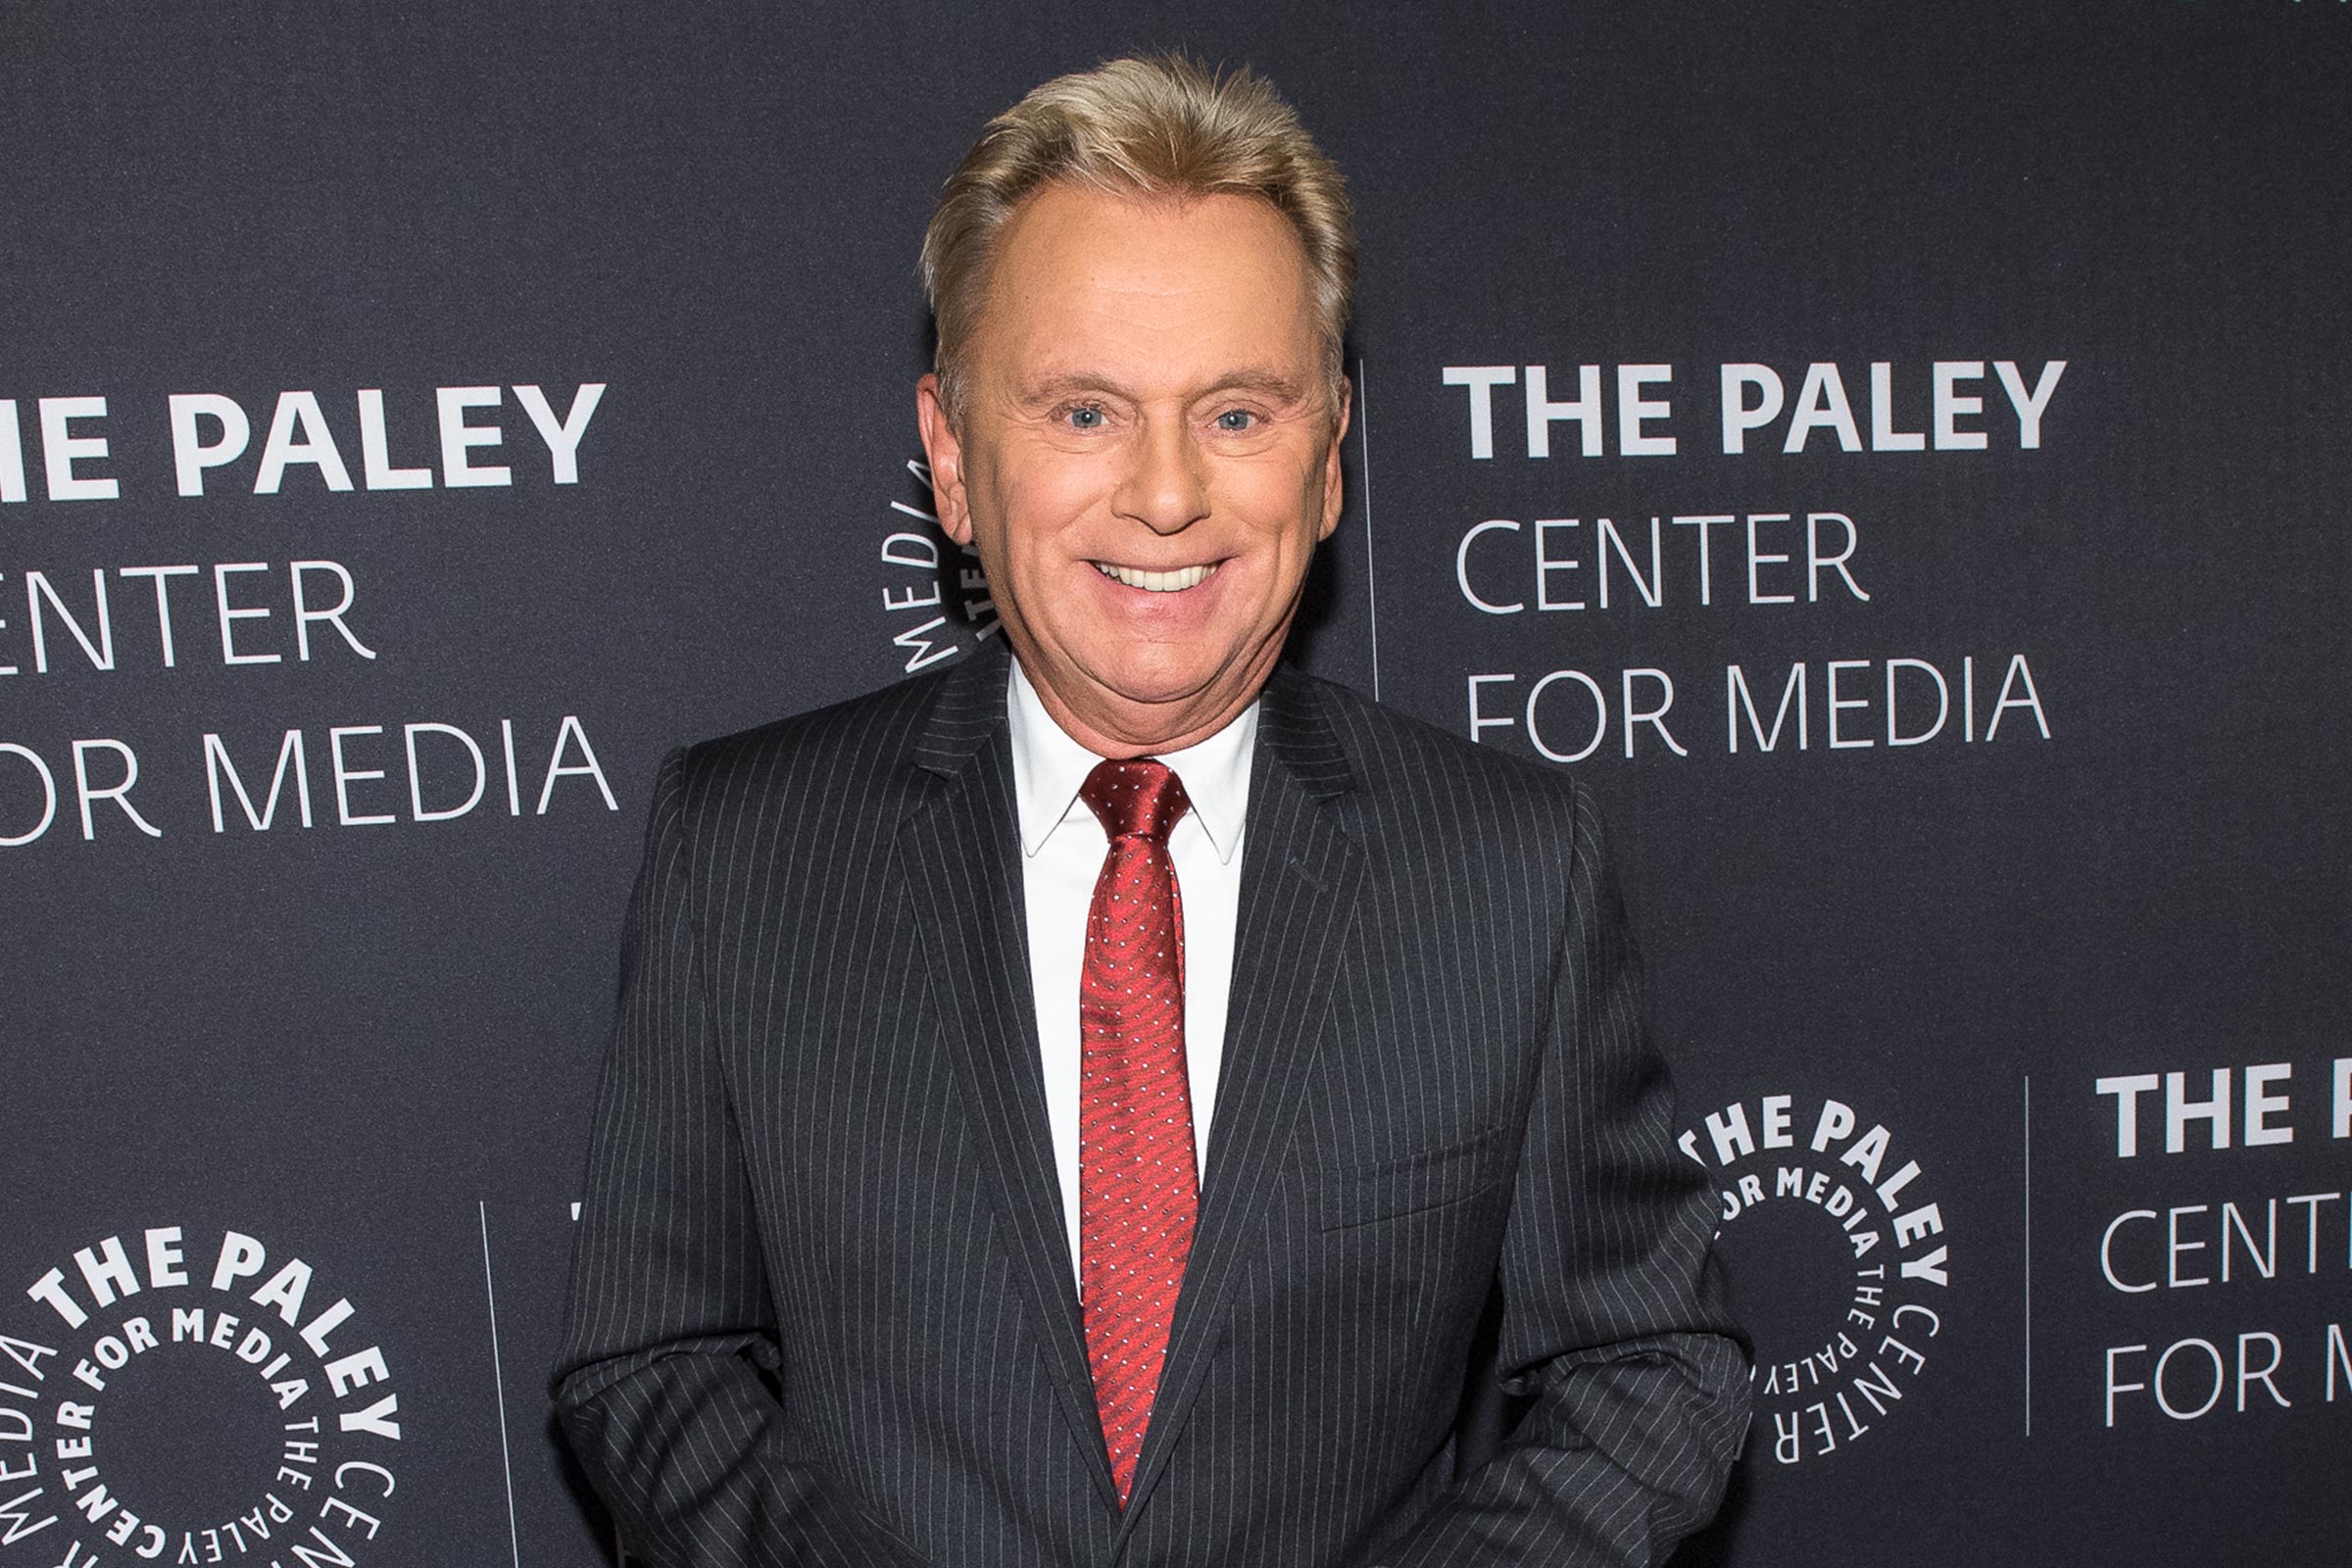 Wheel of Fortune’s Pat Sajak Recovering From Emergency Surgery; Vanna White to Host in His Absence